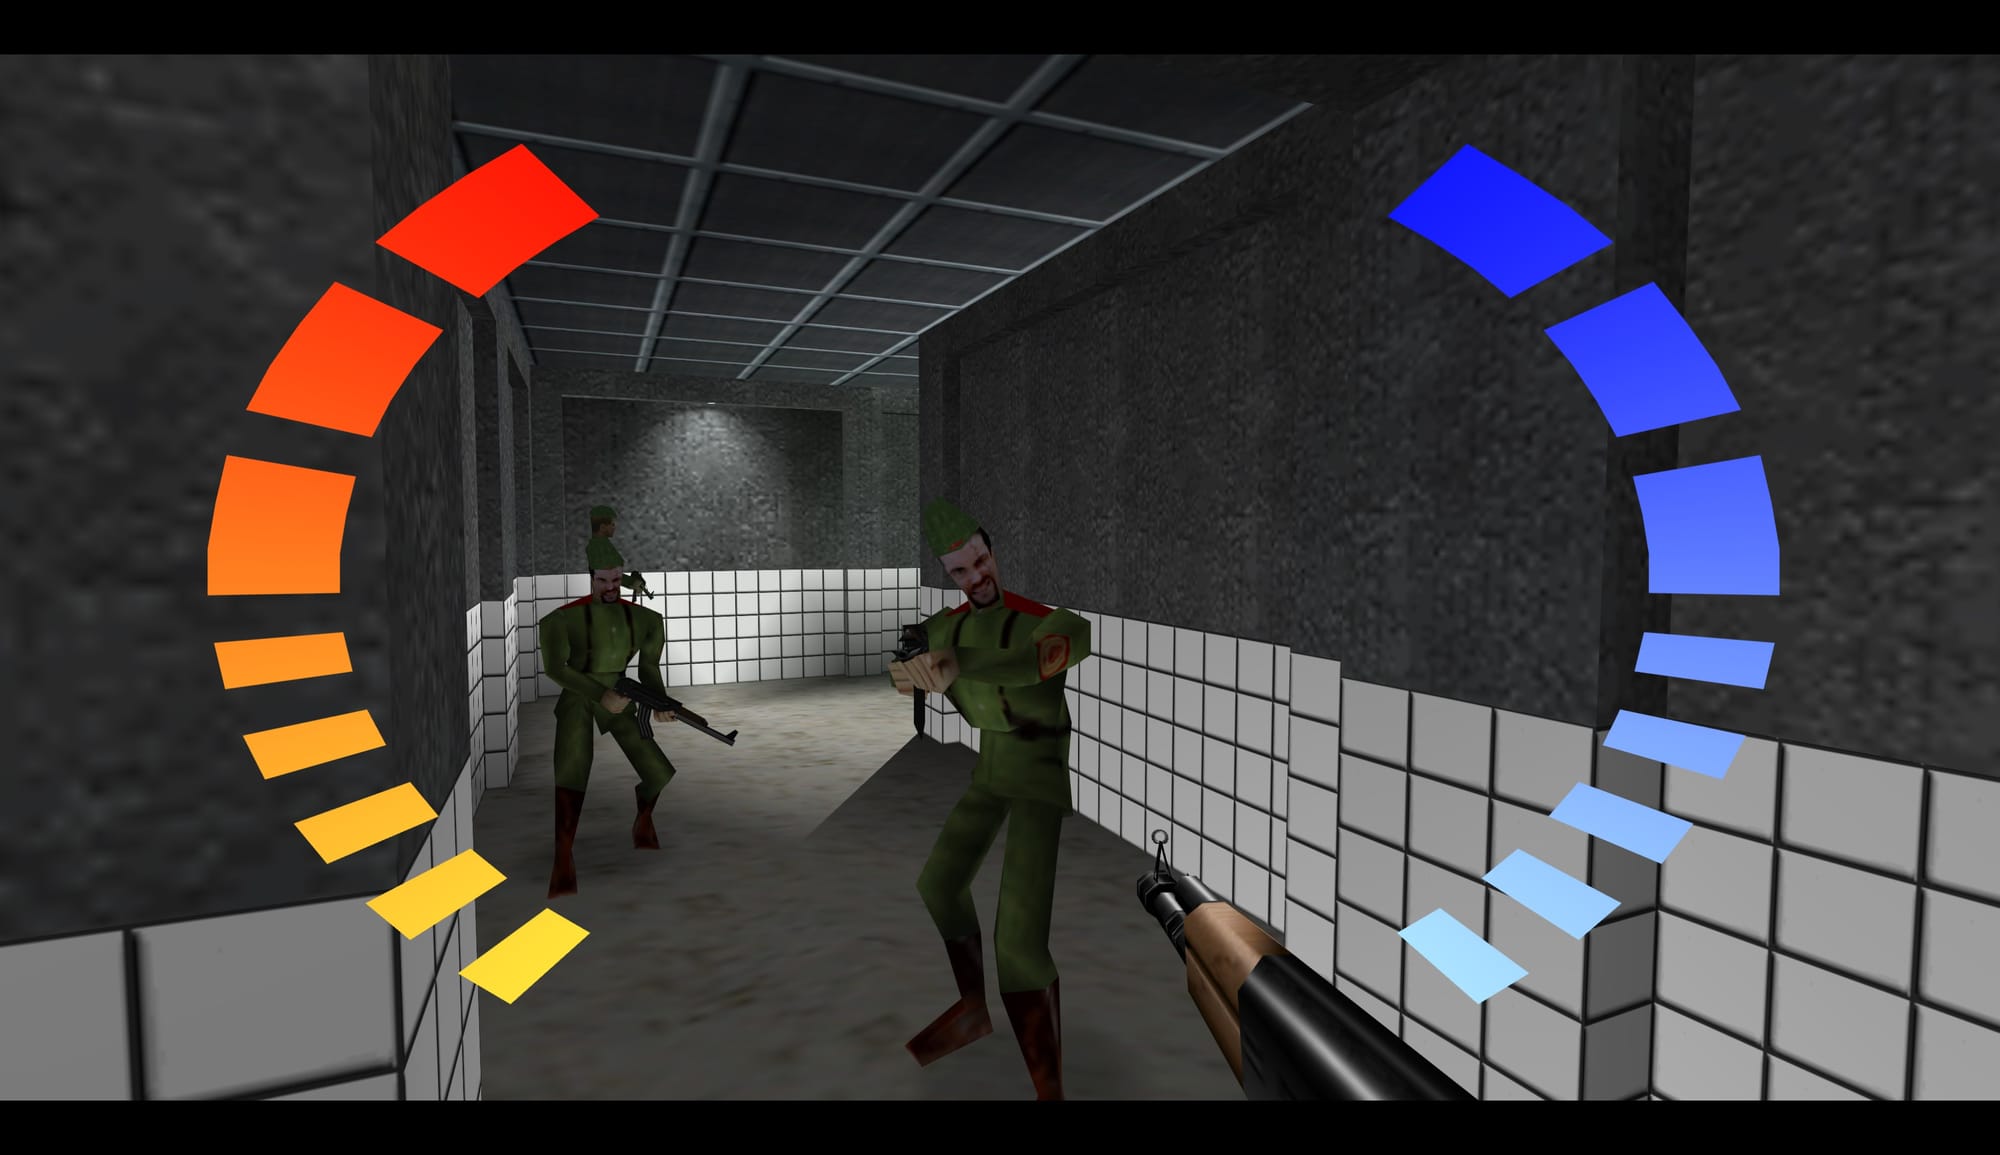 GoldenEye doesn’t hold up, and that’s okay